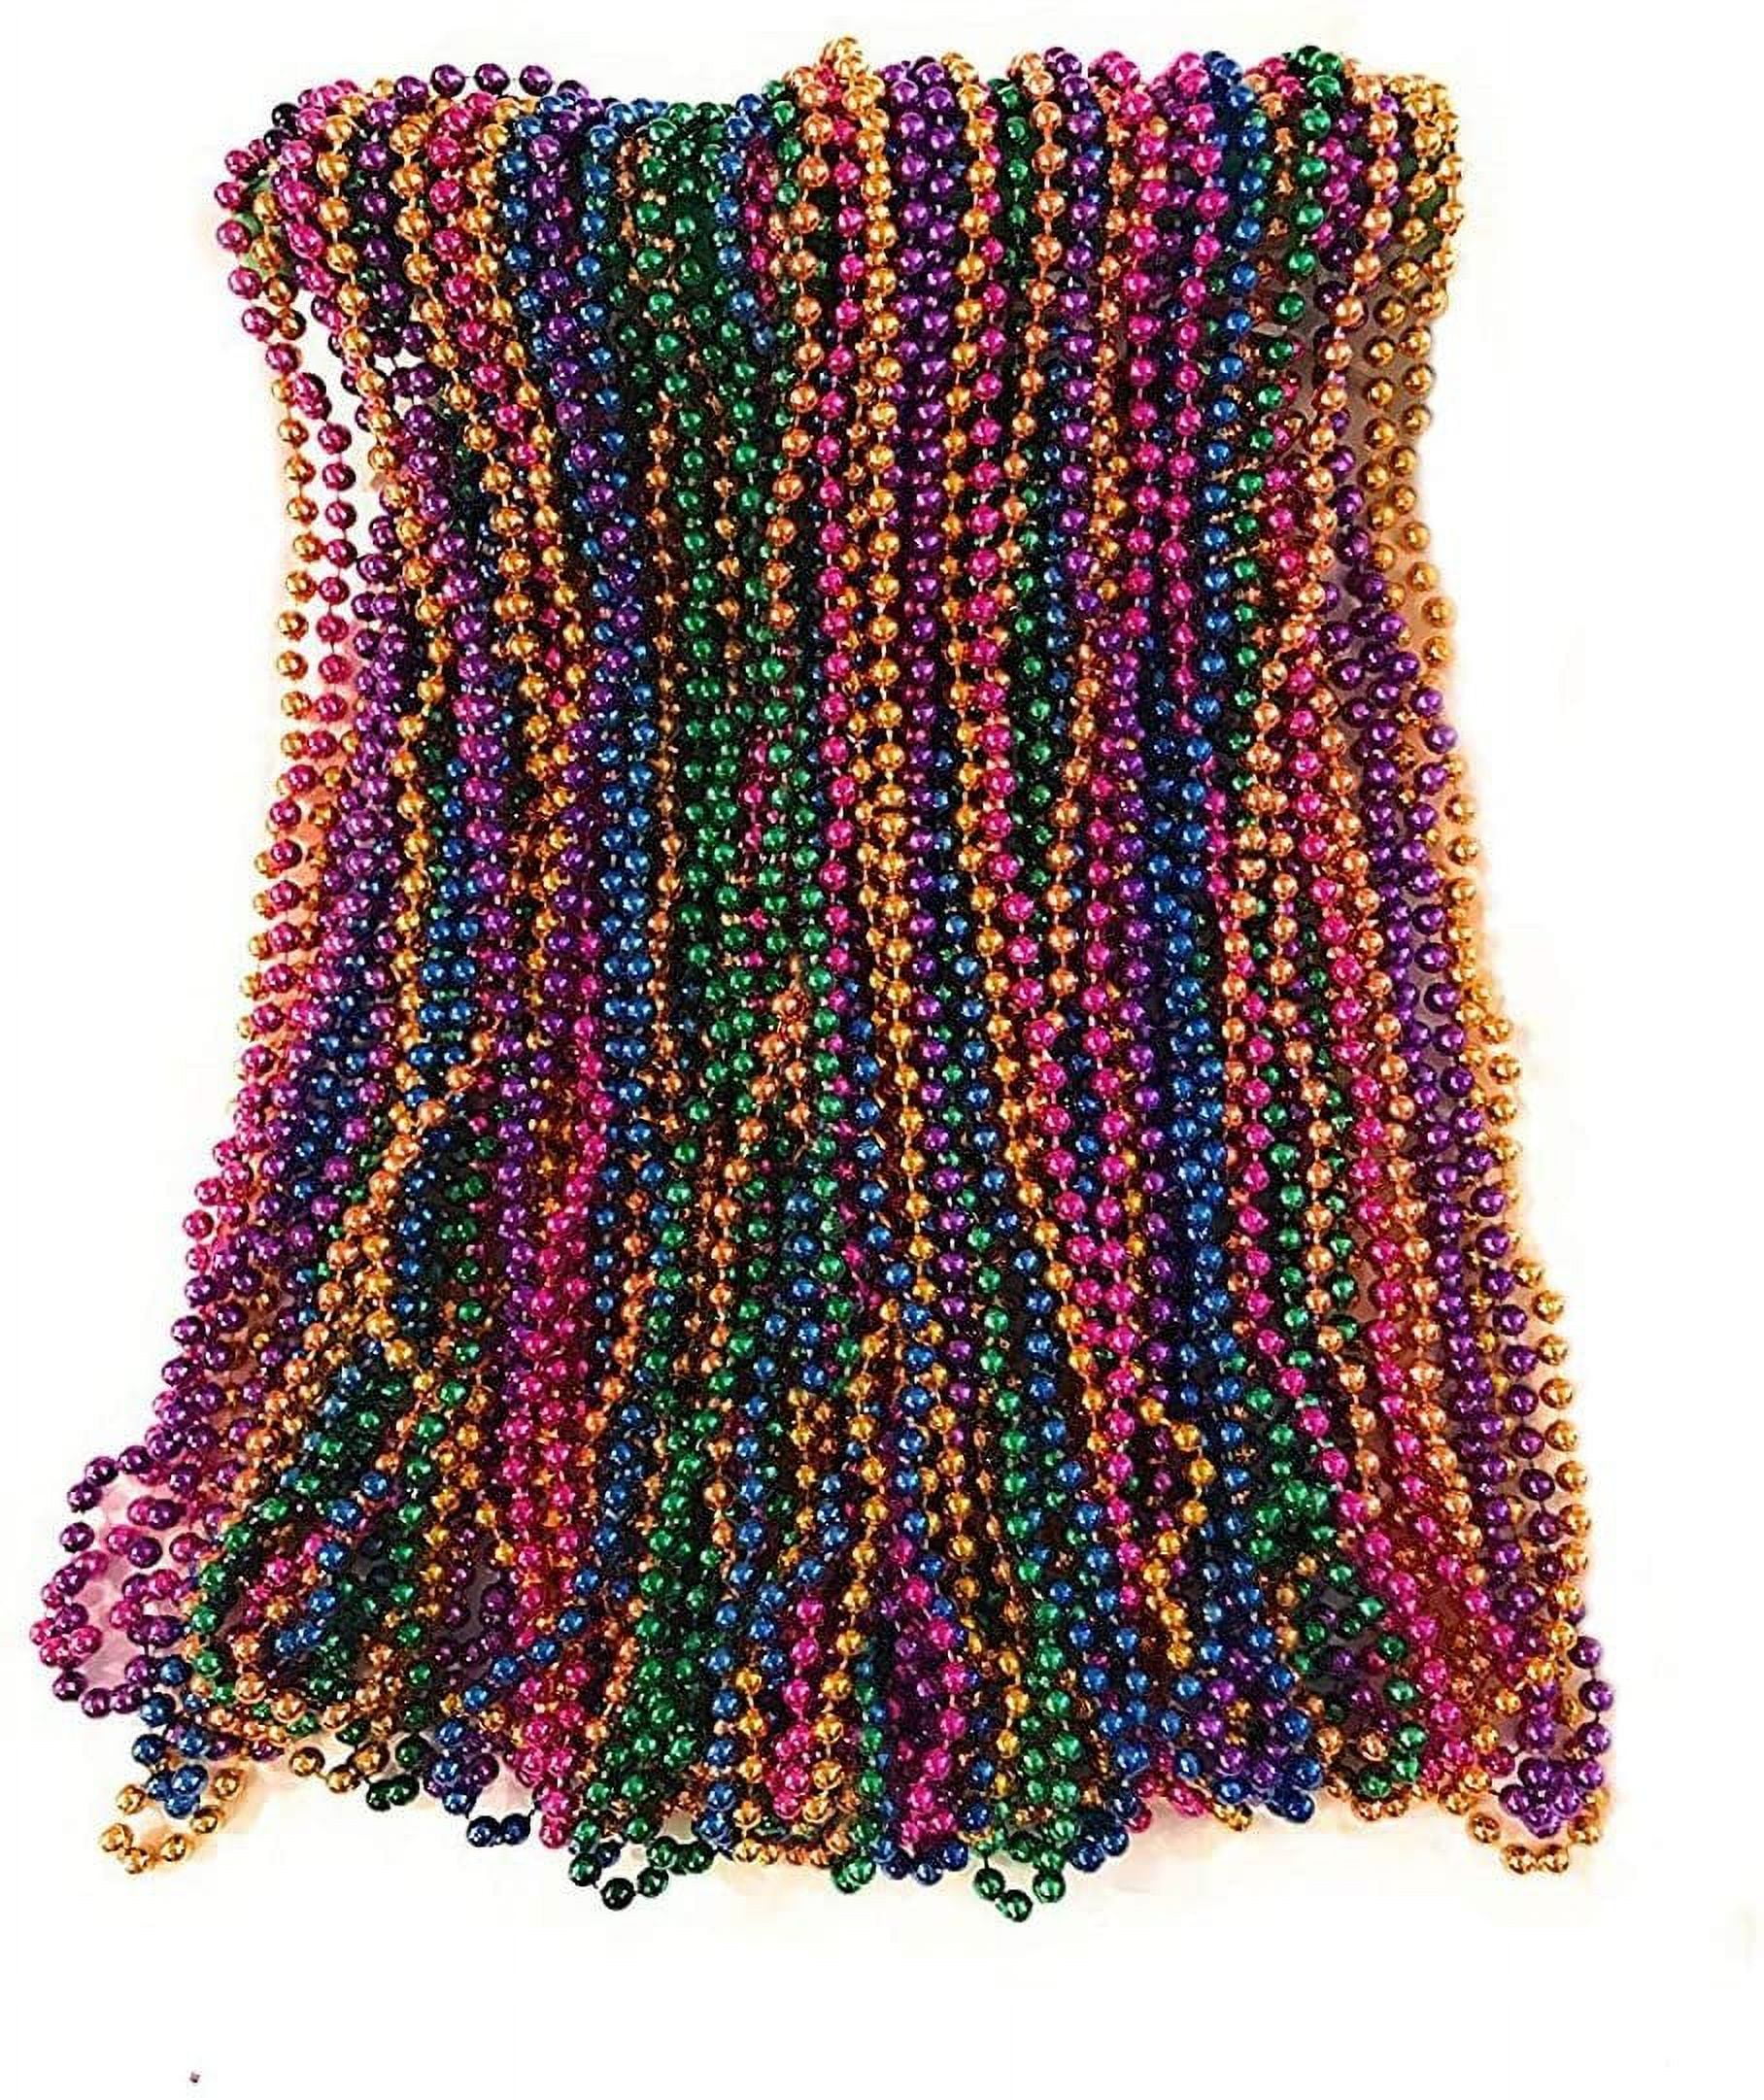 URUW 24pcs 33inch Mardi Gras Beads Necklace Multicolor, AB Beads Glitter  Plastic Necklace, Mardi Gras Throws, Party Beads Costume Necklaces,Birthday